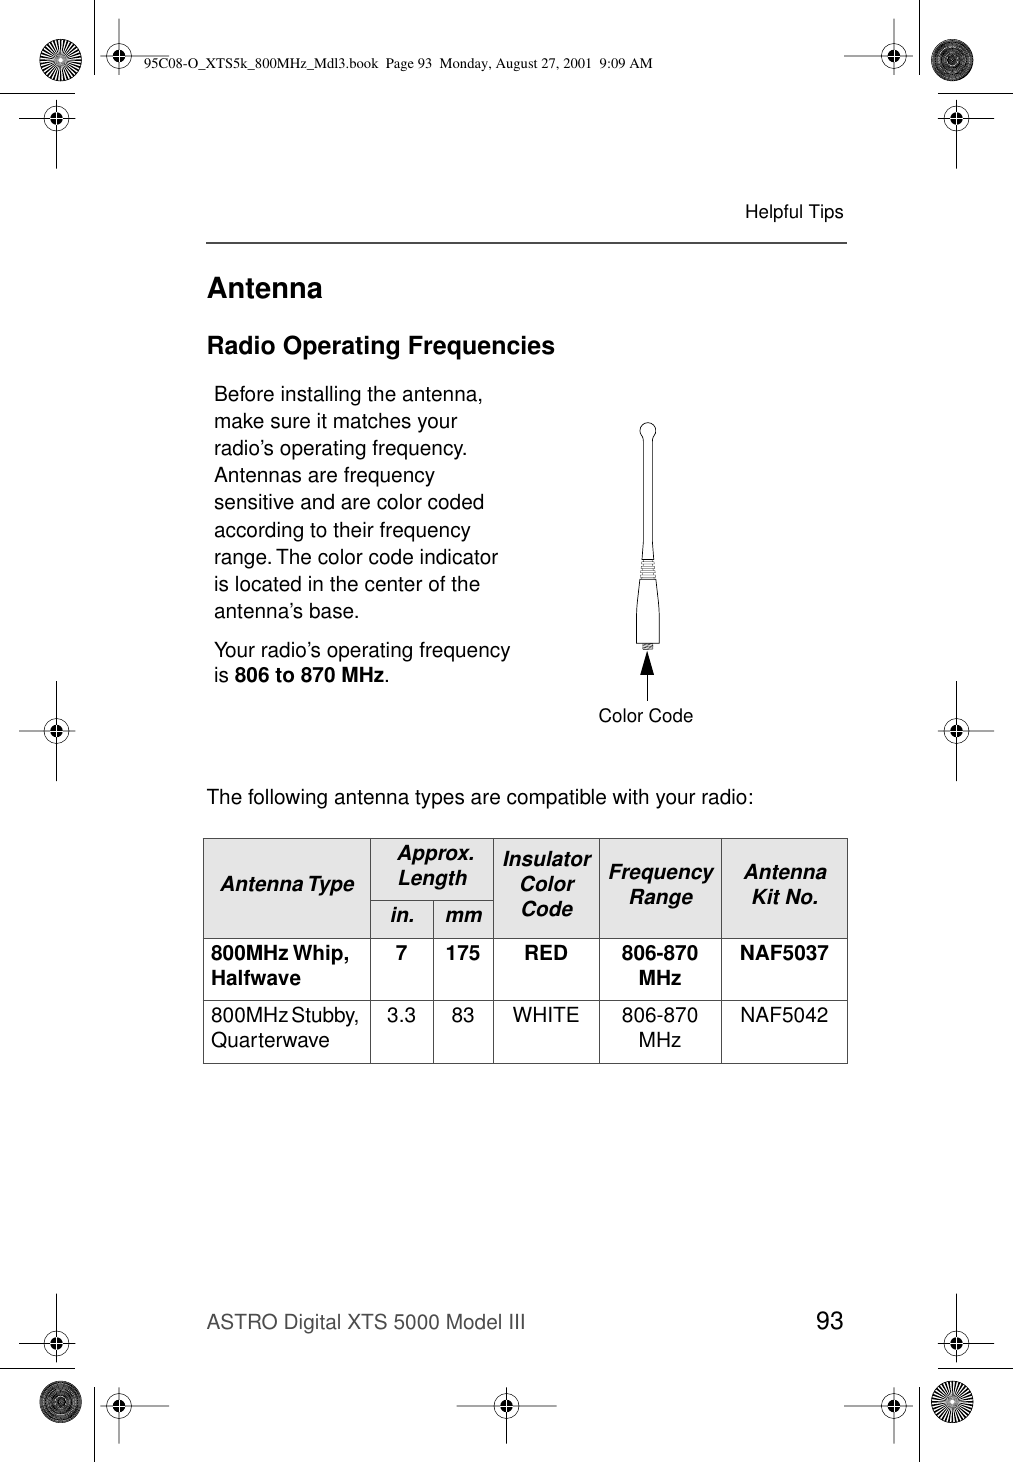 ASTRO Digital XTS 5000 Model III 93Helpful TipsAntennaRadio Operating FrequenciesThe following antenna types are compatible with your radio:Before installing the antenna, make sure it matches your radio’s operating frequency. Antennas are frequency sensitive and are color coded according to their frequency range. The color code indicator is located in the center of the antenna’s base.Your radio’s operating frequency is 806 to 870 MHz.Antenna Type Approx. Length Insulator ColorCodeFrequency Range Antenna Kit No.in. mm800MHz Whip,Halfwave 7 175 RED 806-870 MHz NAF5037800MHz Stubby, Quarterwave 3.3 83 WHITE 806-870 MHz NAF5042MAEPF-23262-OUHFHelicalUHF800 MHzWhip800 MHzStubbyColor Code95C08-O_XTS5k_800MHz_Mdl3.book  Page 93  Monday, August 27, 2001  9:09 AM